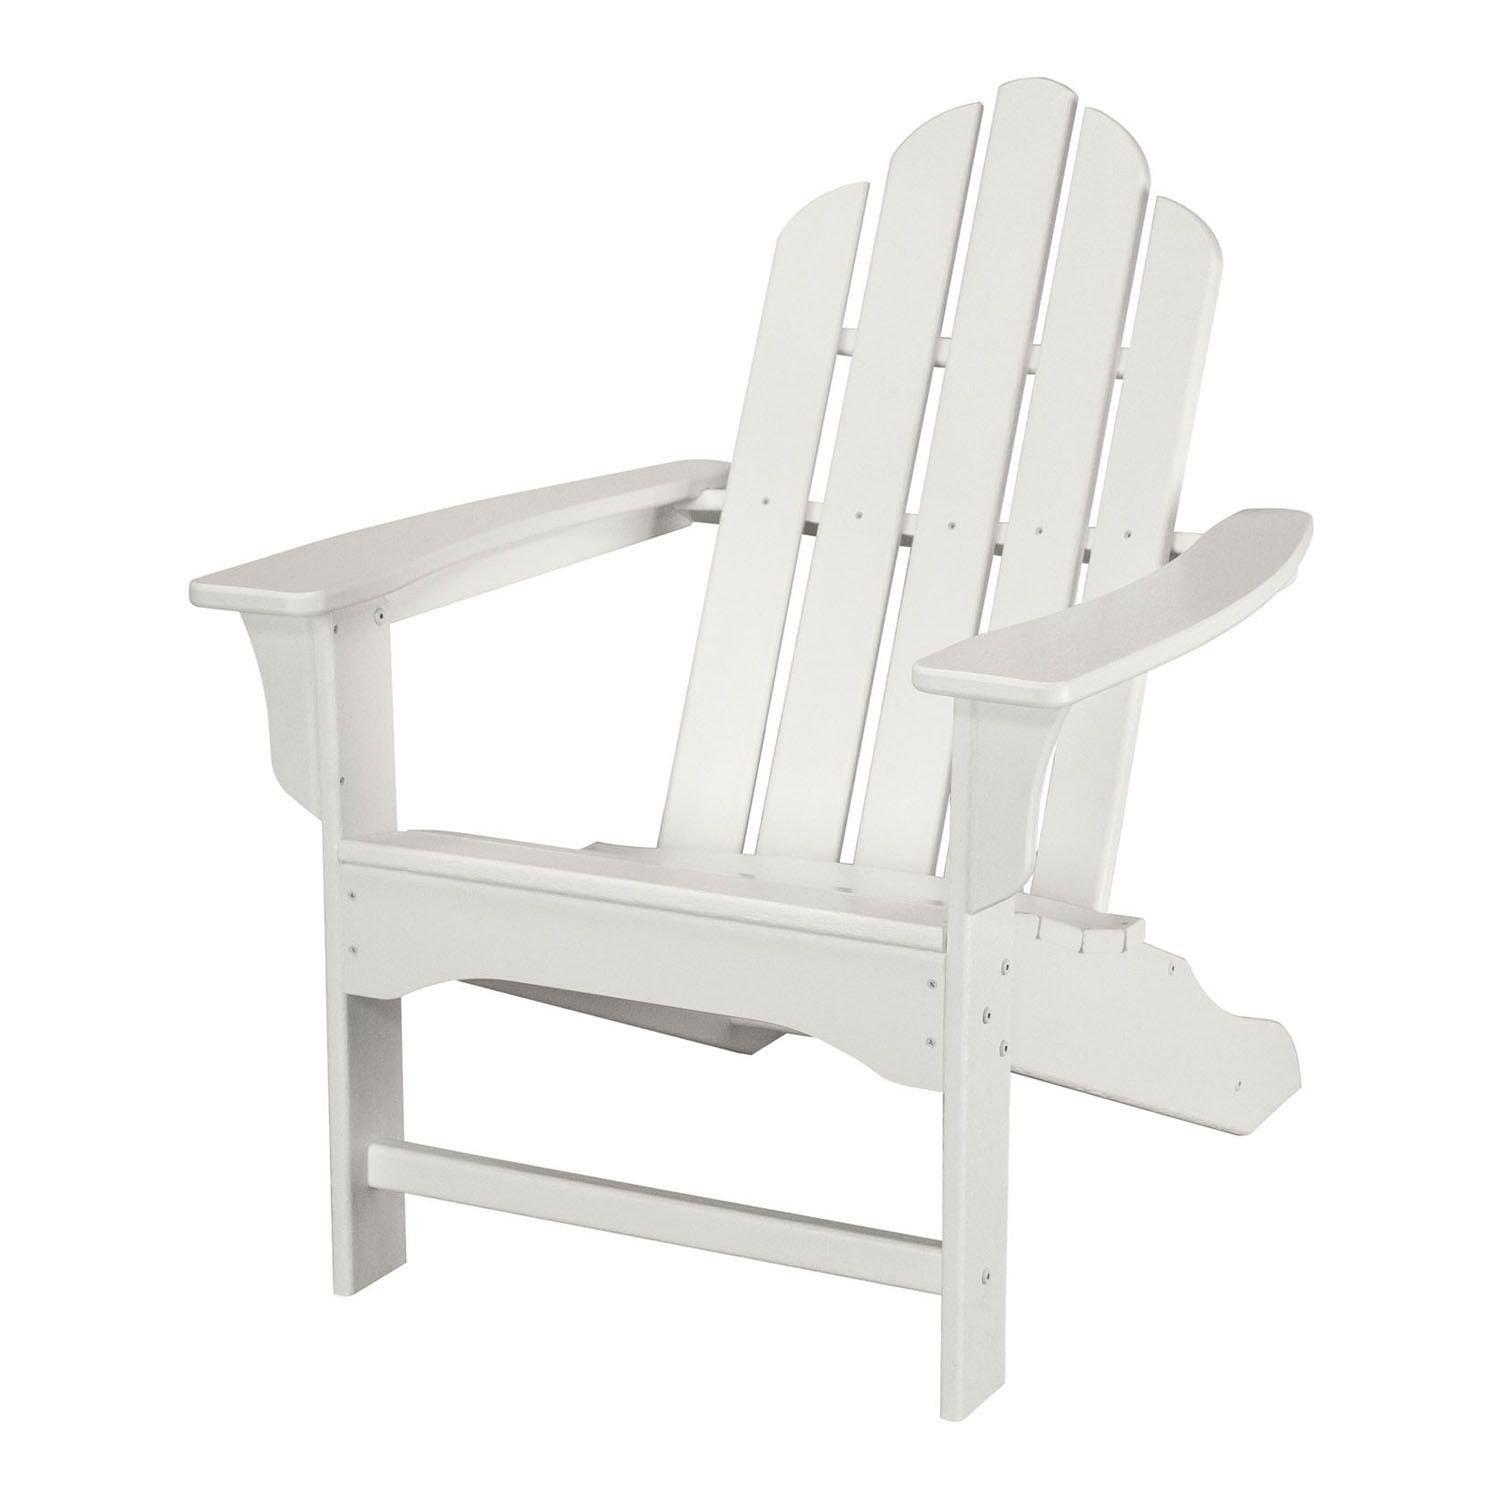 Image for Hanover Accessories All-Weather Contoured Adirondack Chair at Kohl's.